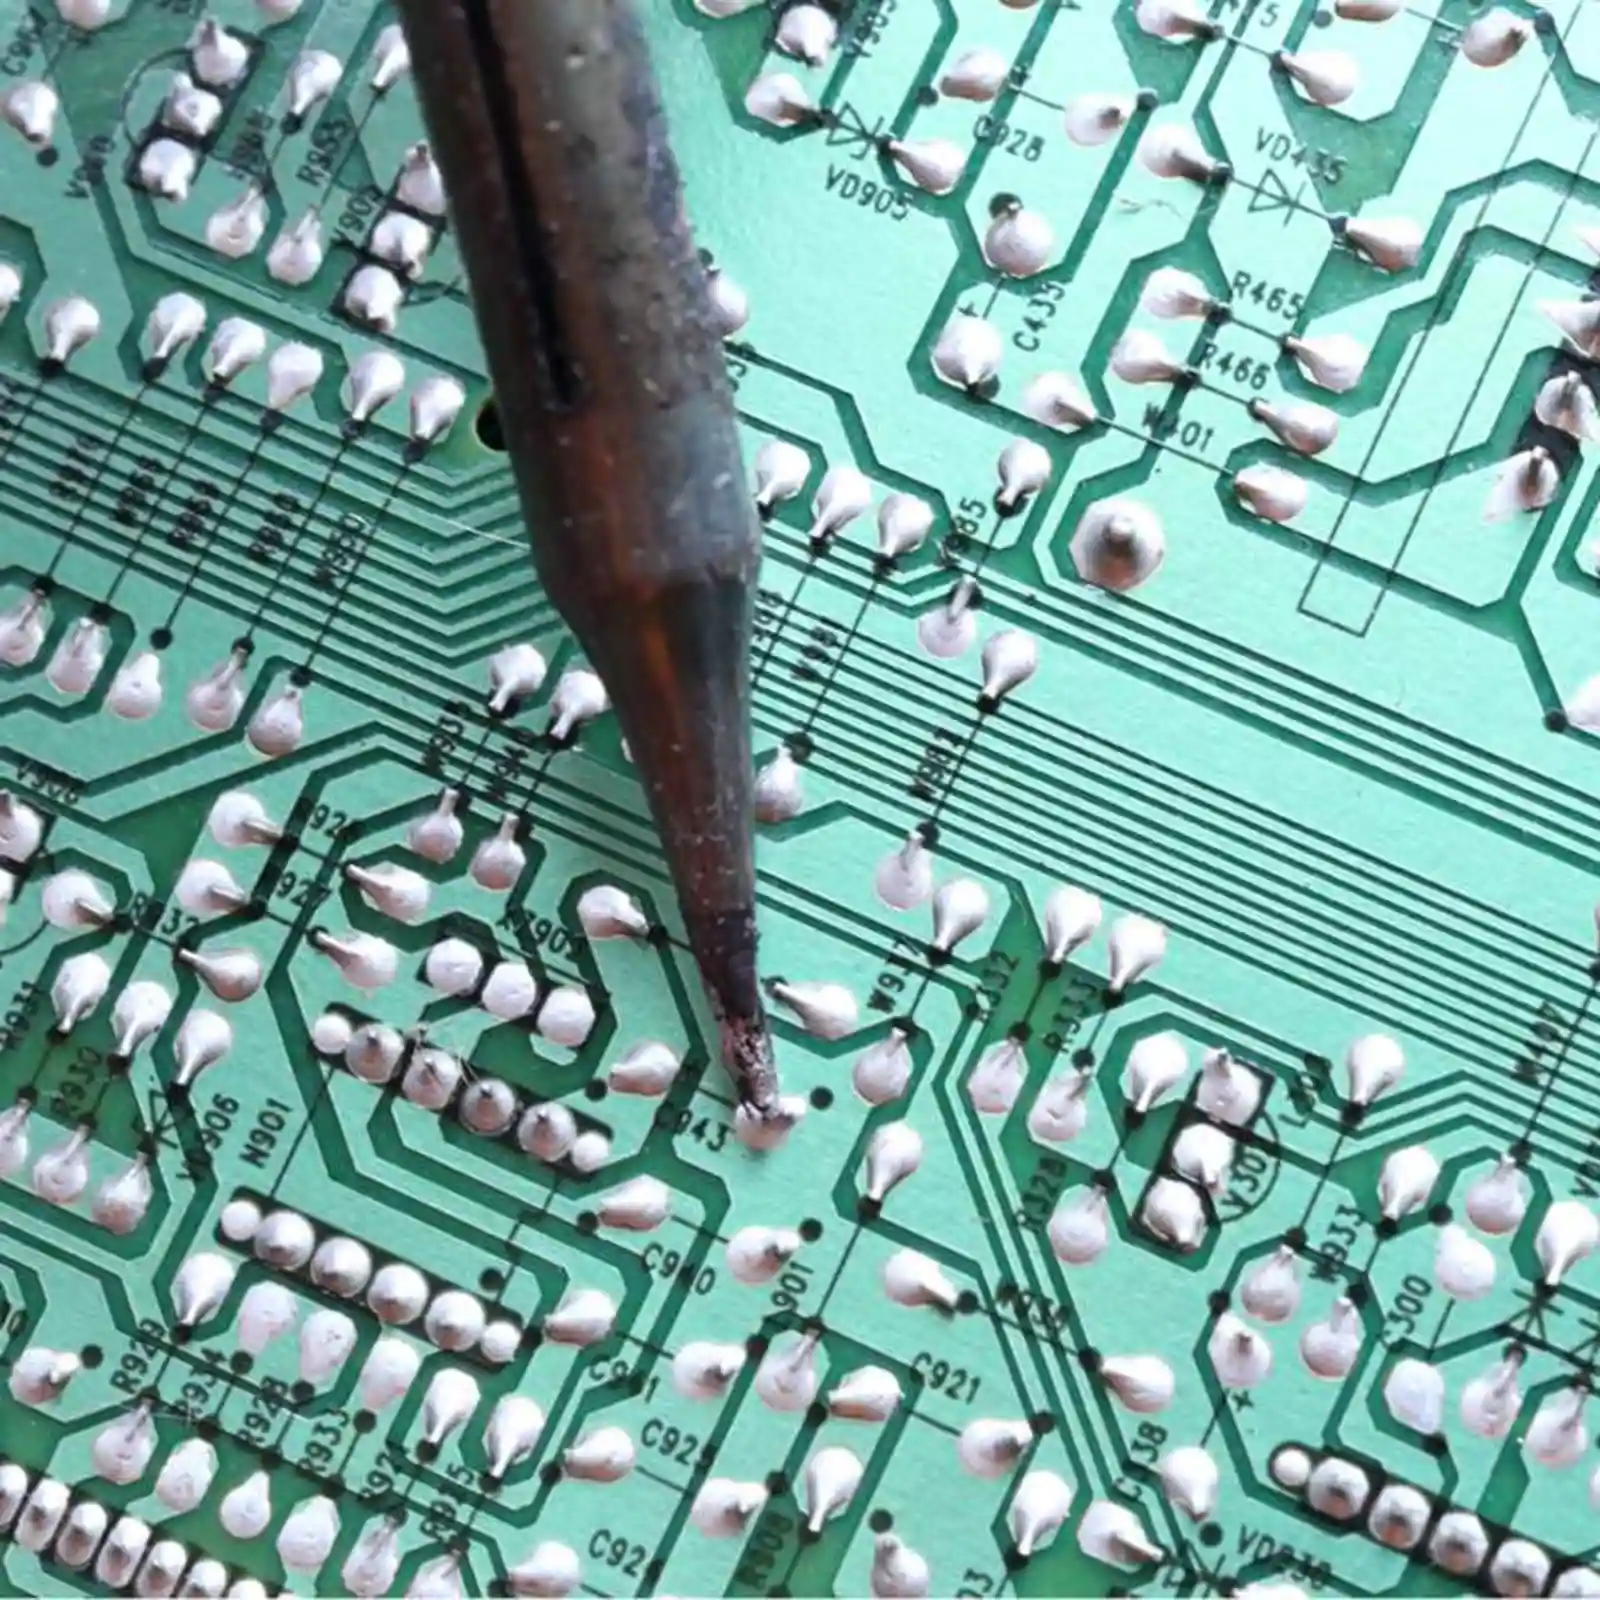 Checking for Soldering Defects